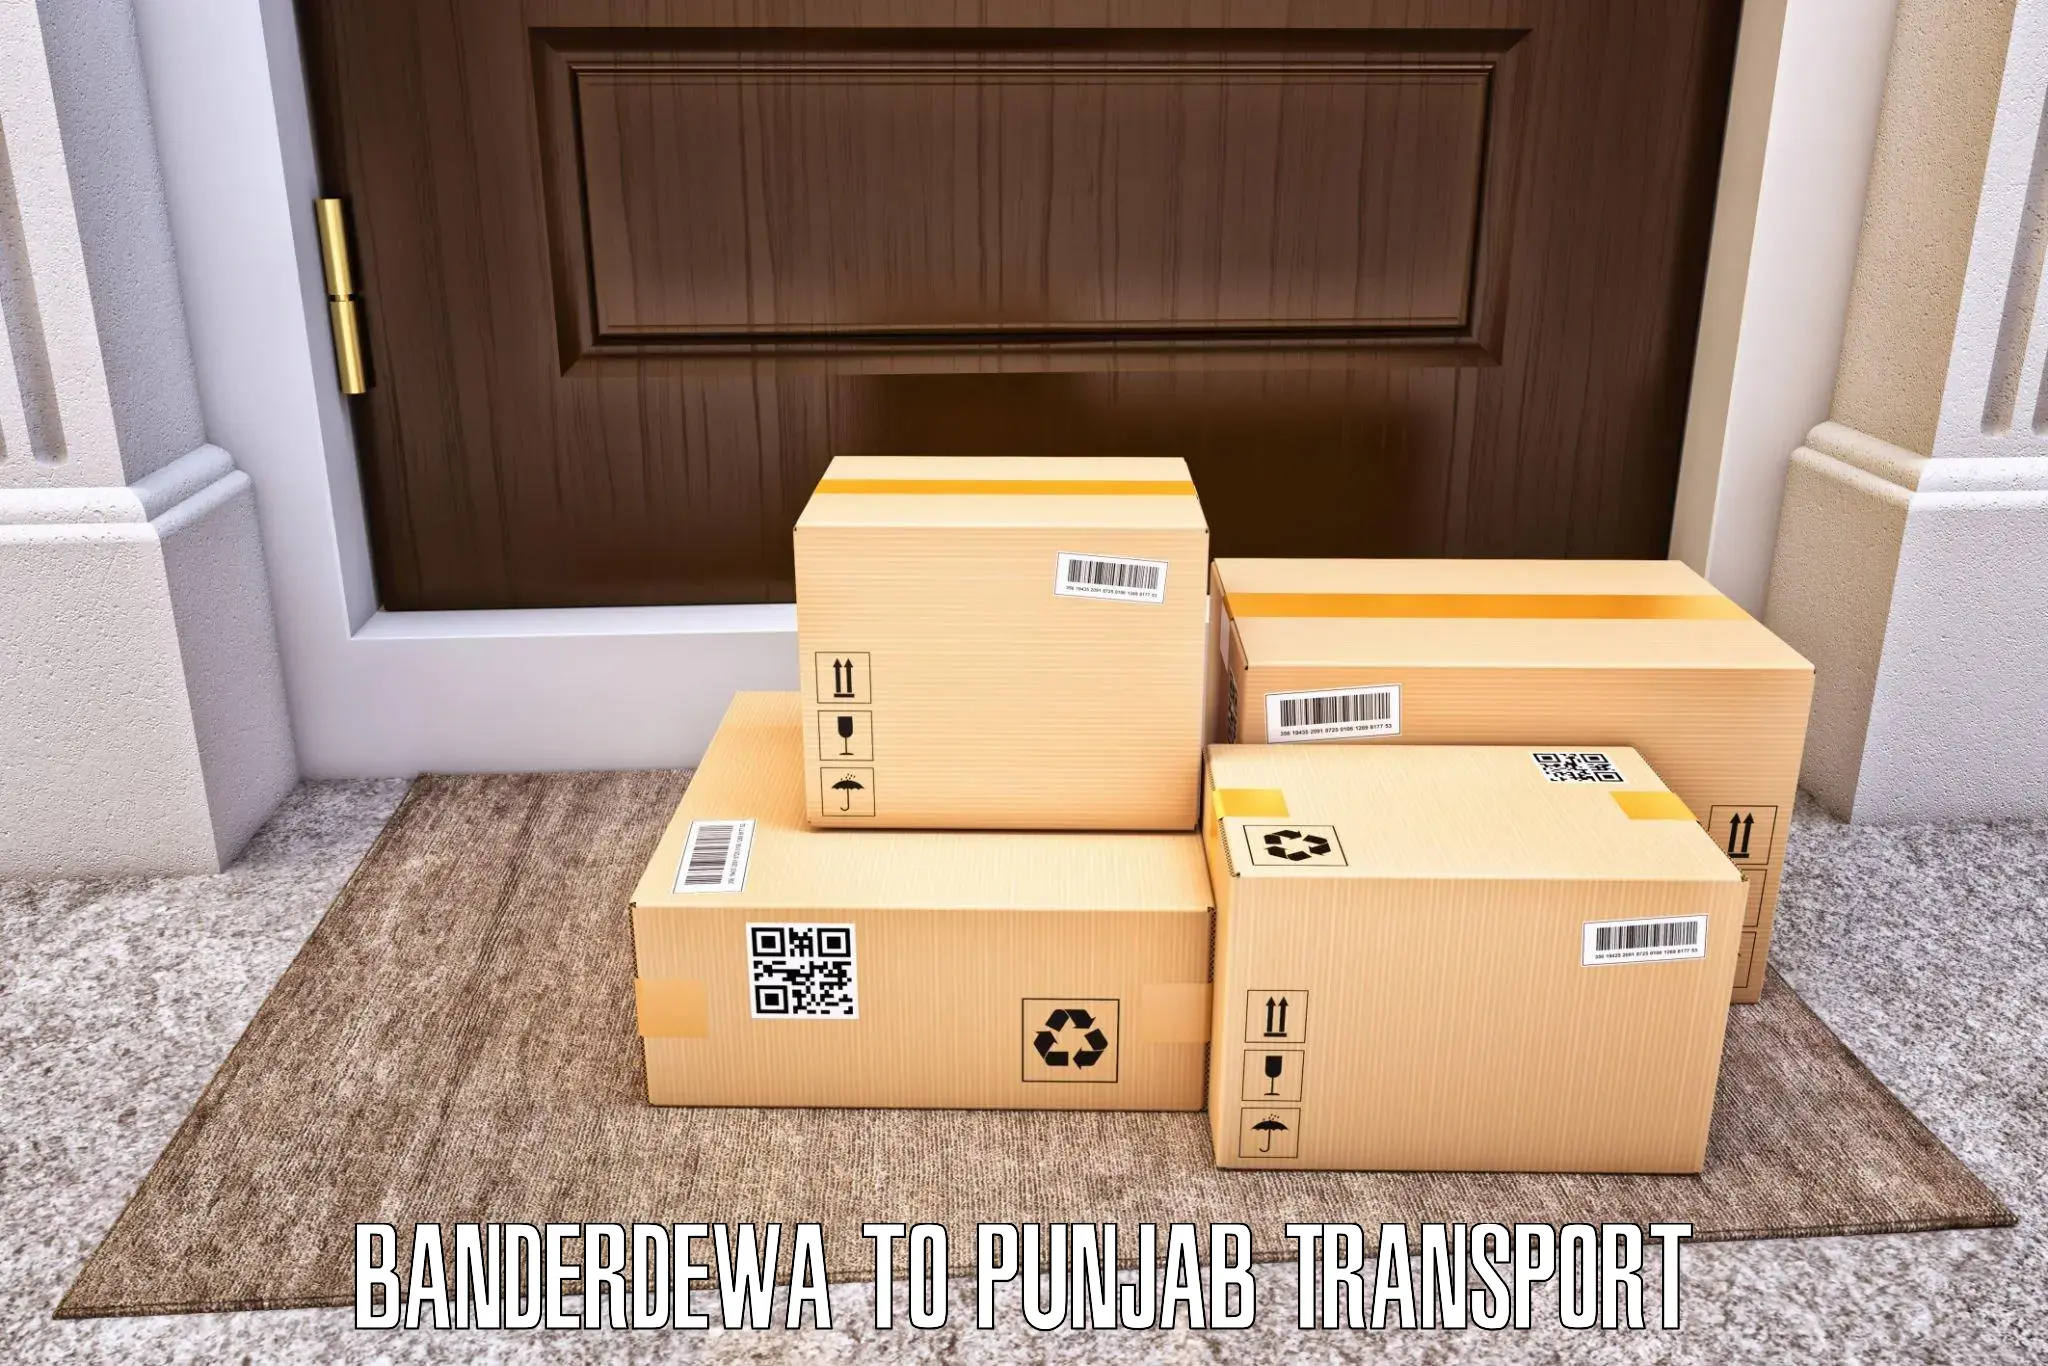 Two wheeler transport services in Banderdewa to Patiala